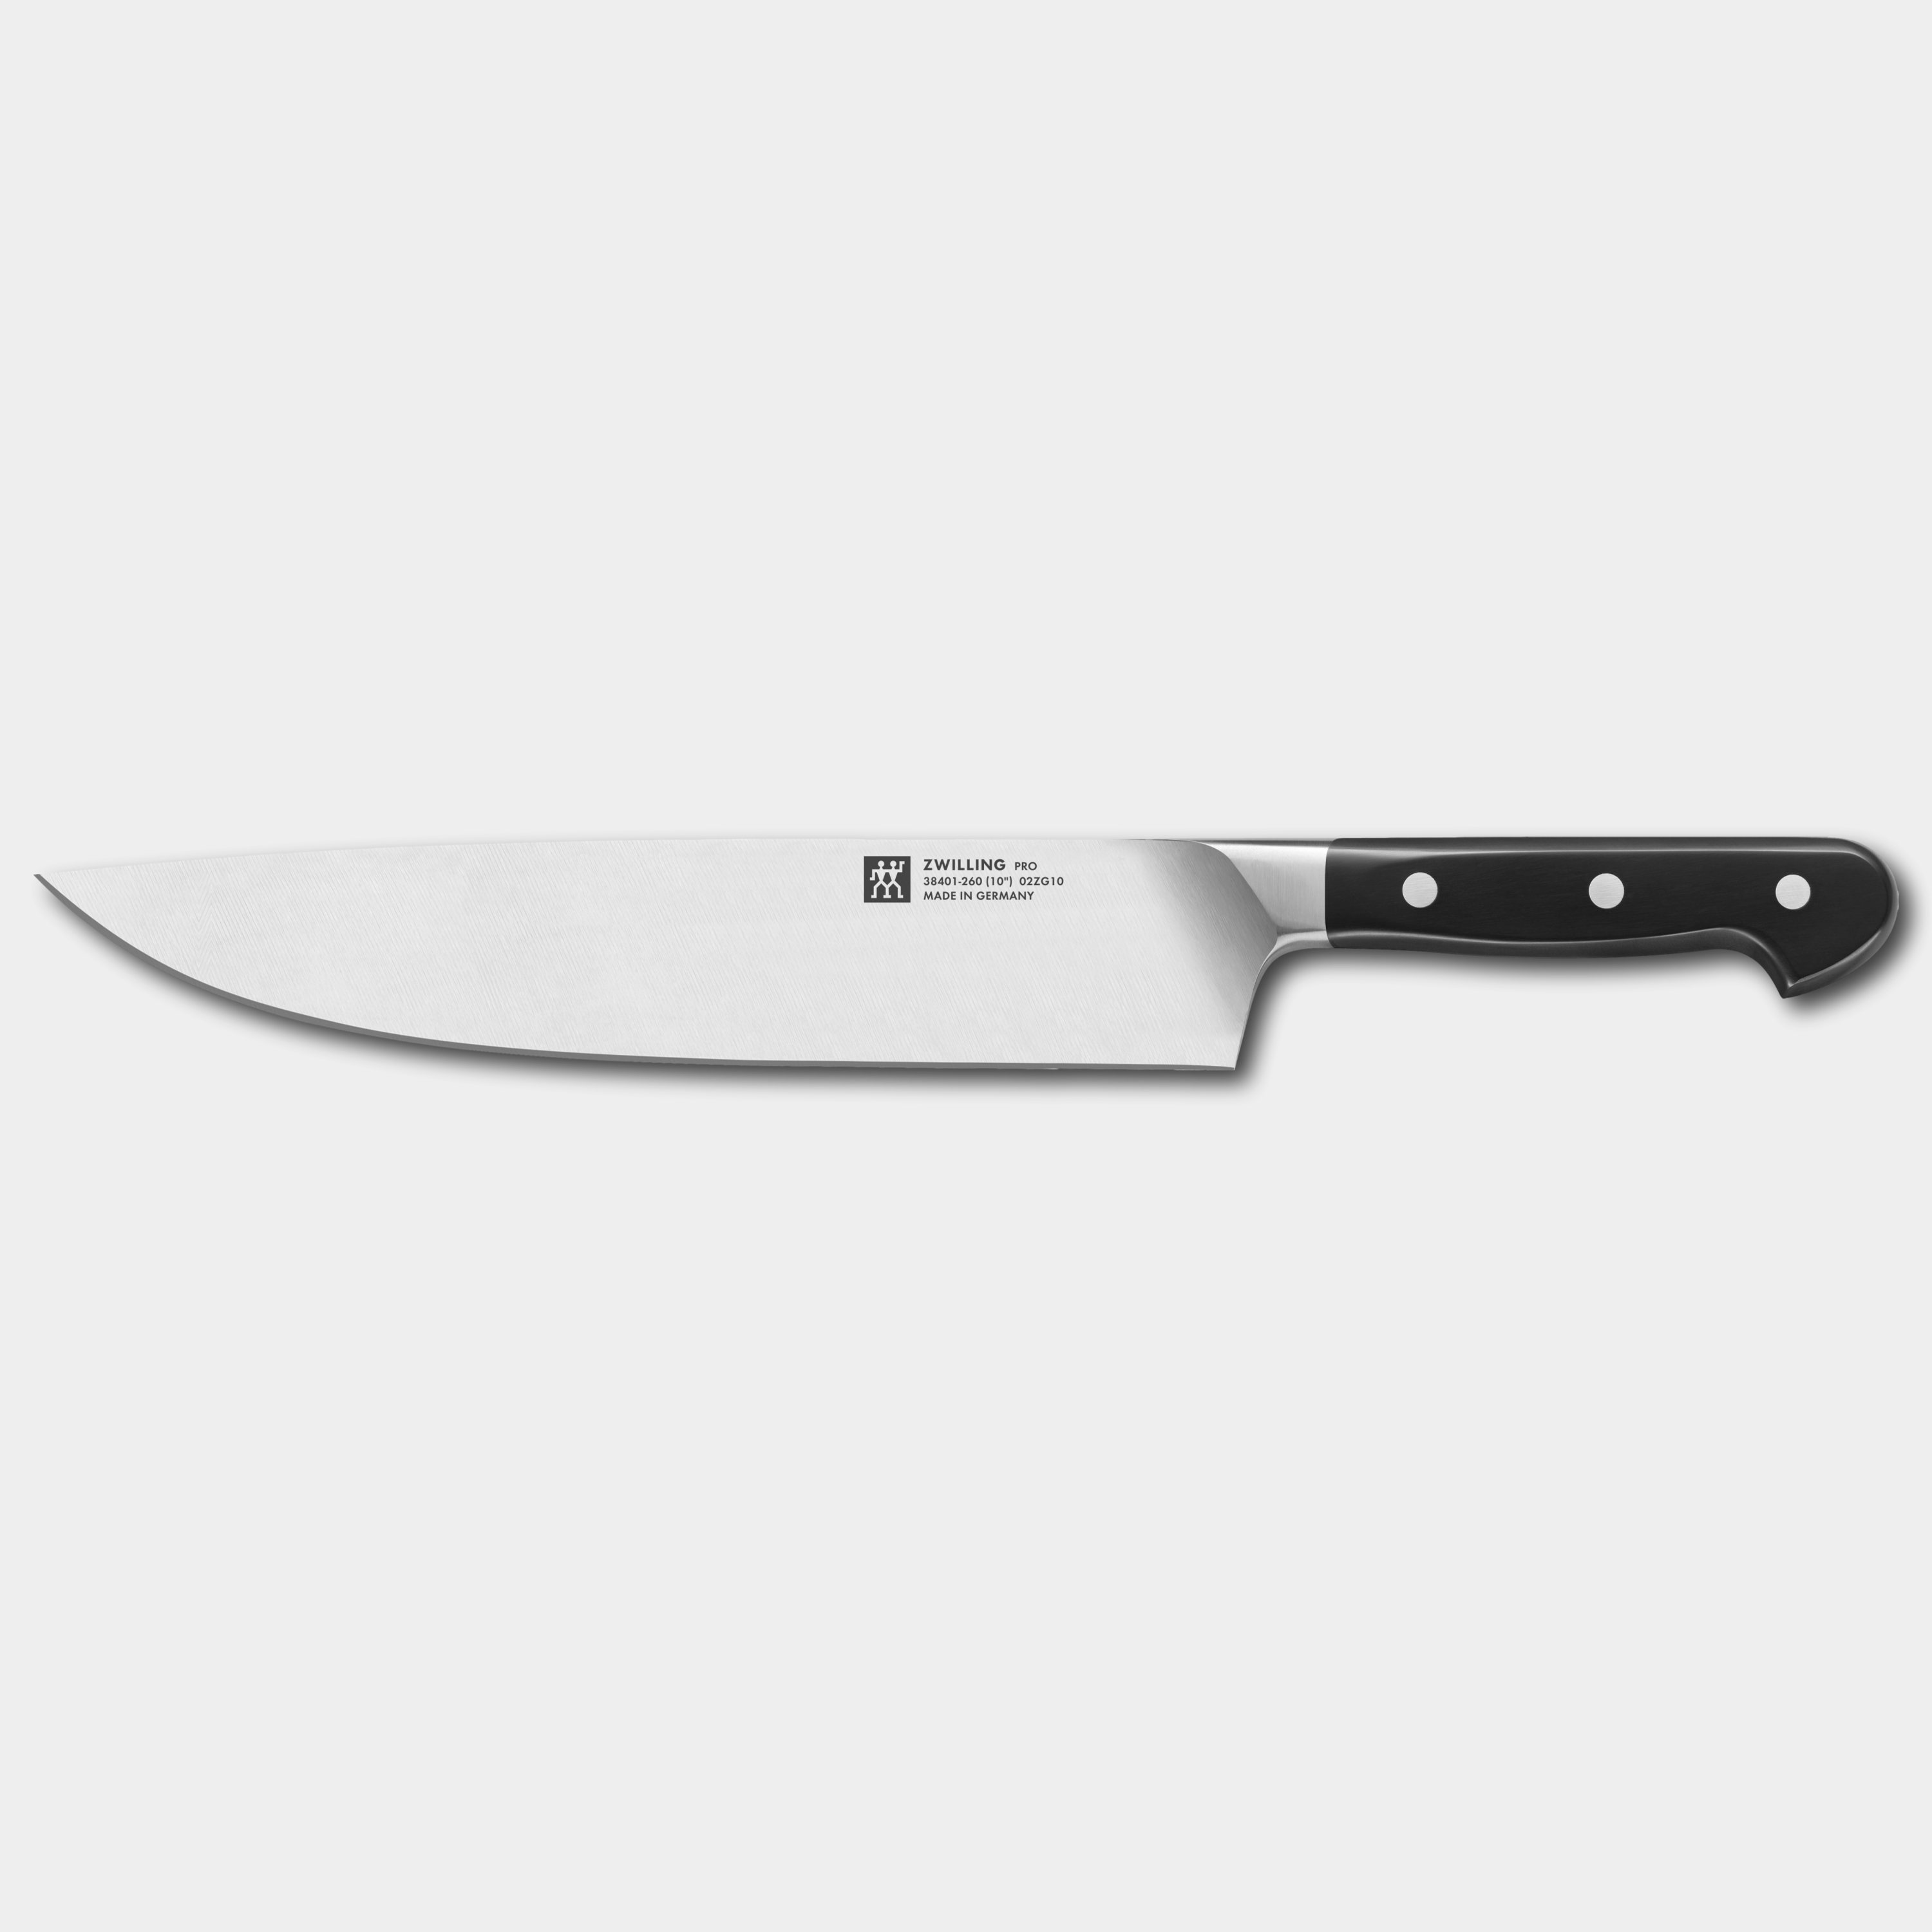 ZWILLING® Pro 26cm Chef's Knife